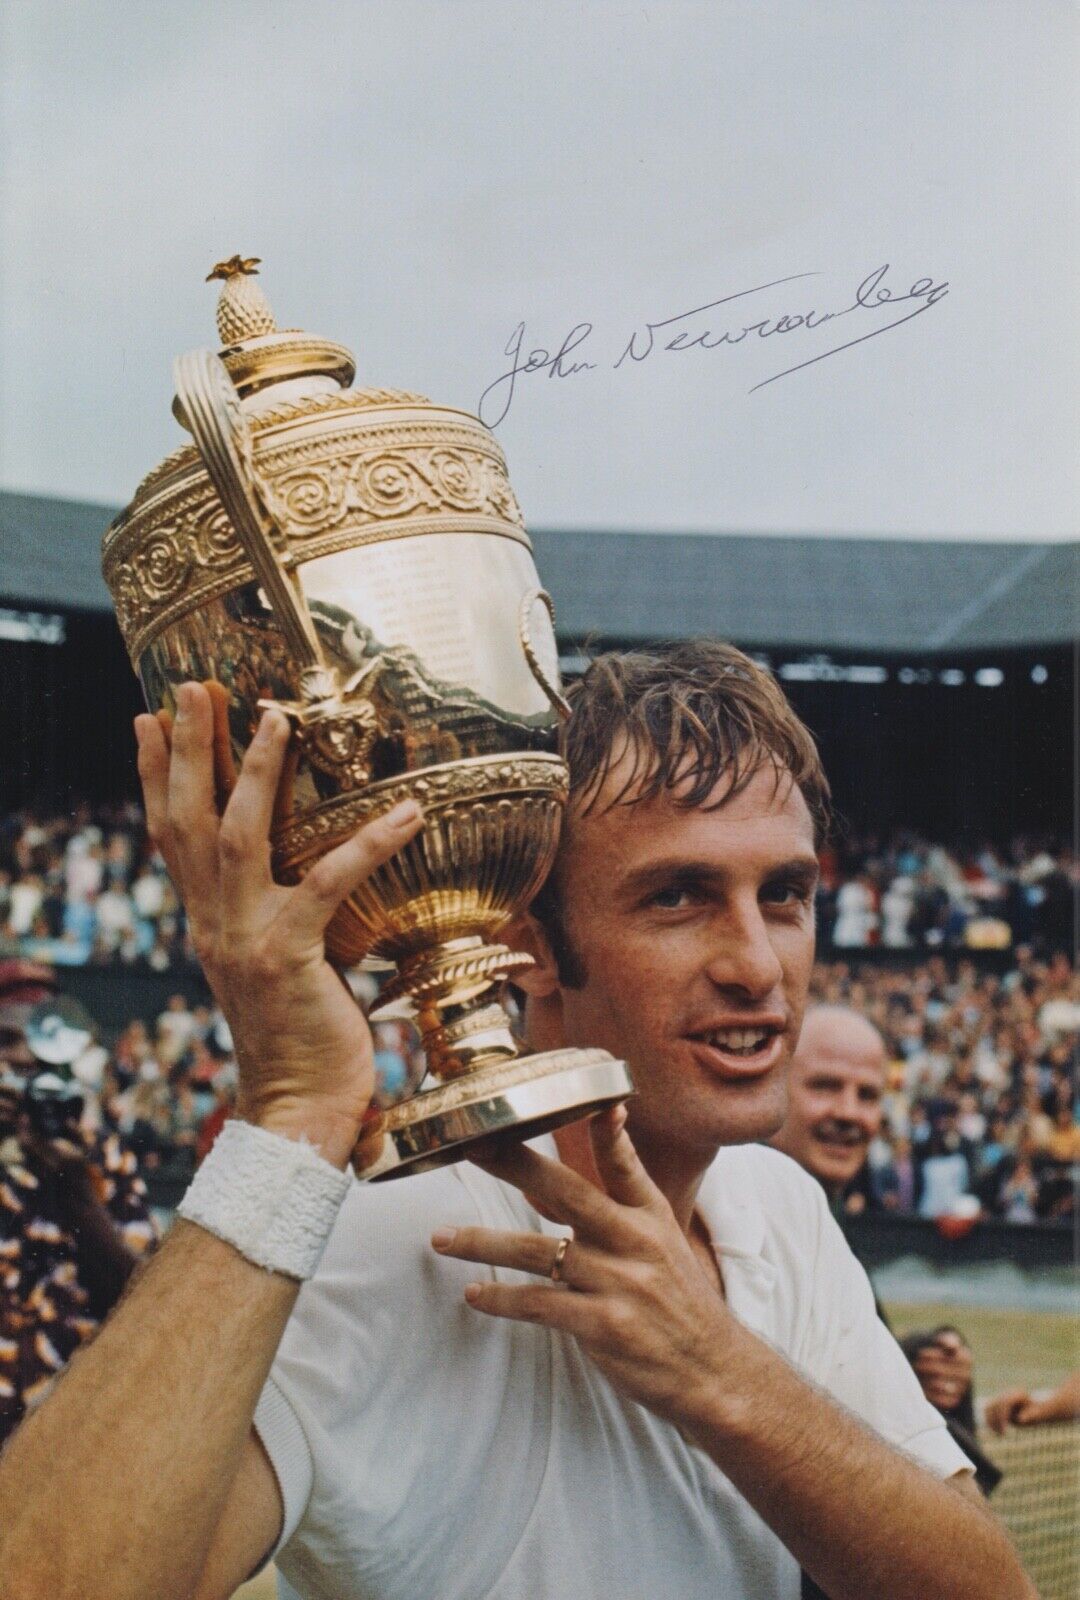 JOHN NEWCOMBE HAND SIGNED 12X8 Photo Poster painting WIMBLEDON TENNIS AUTOGRAPH 2